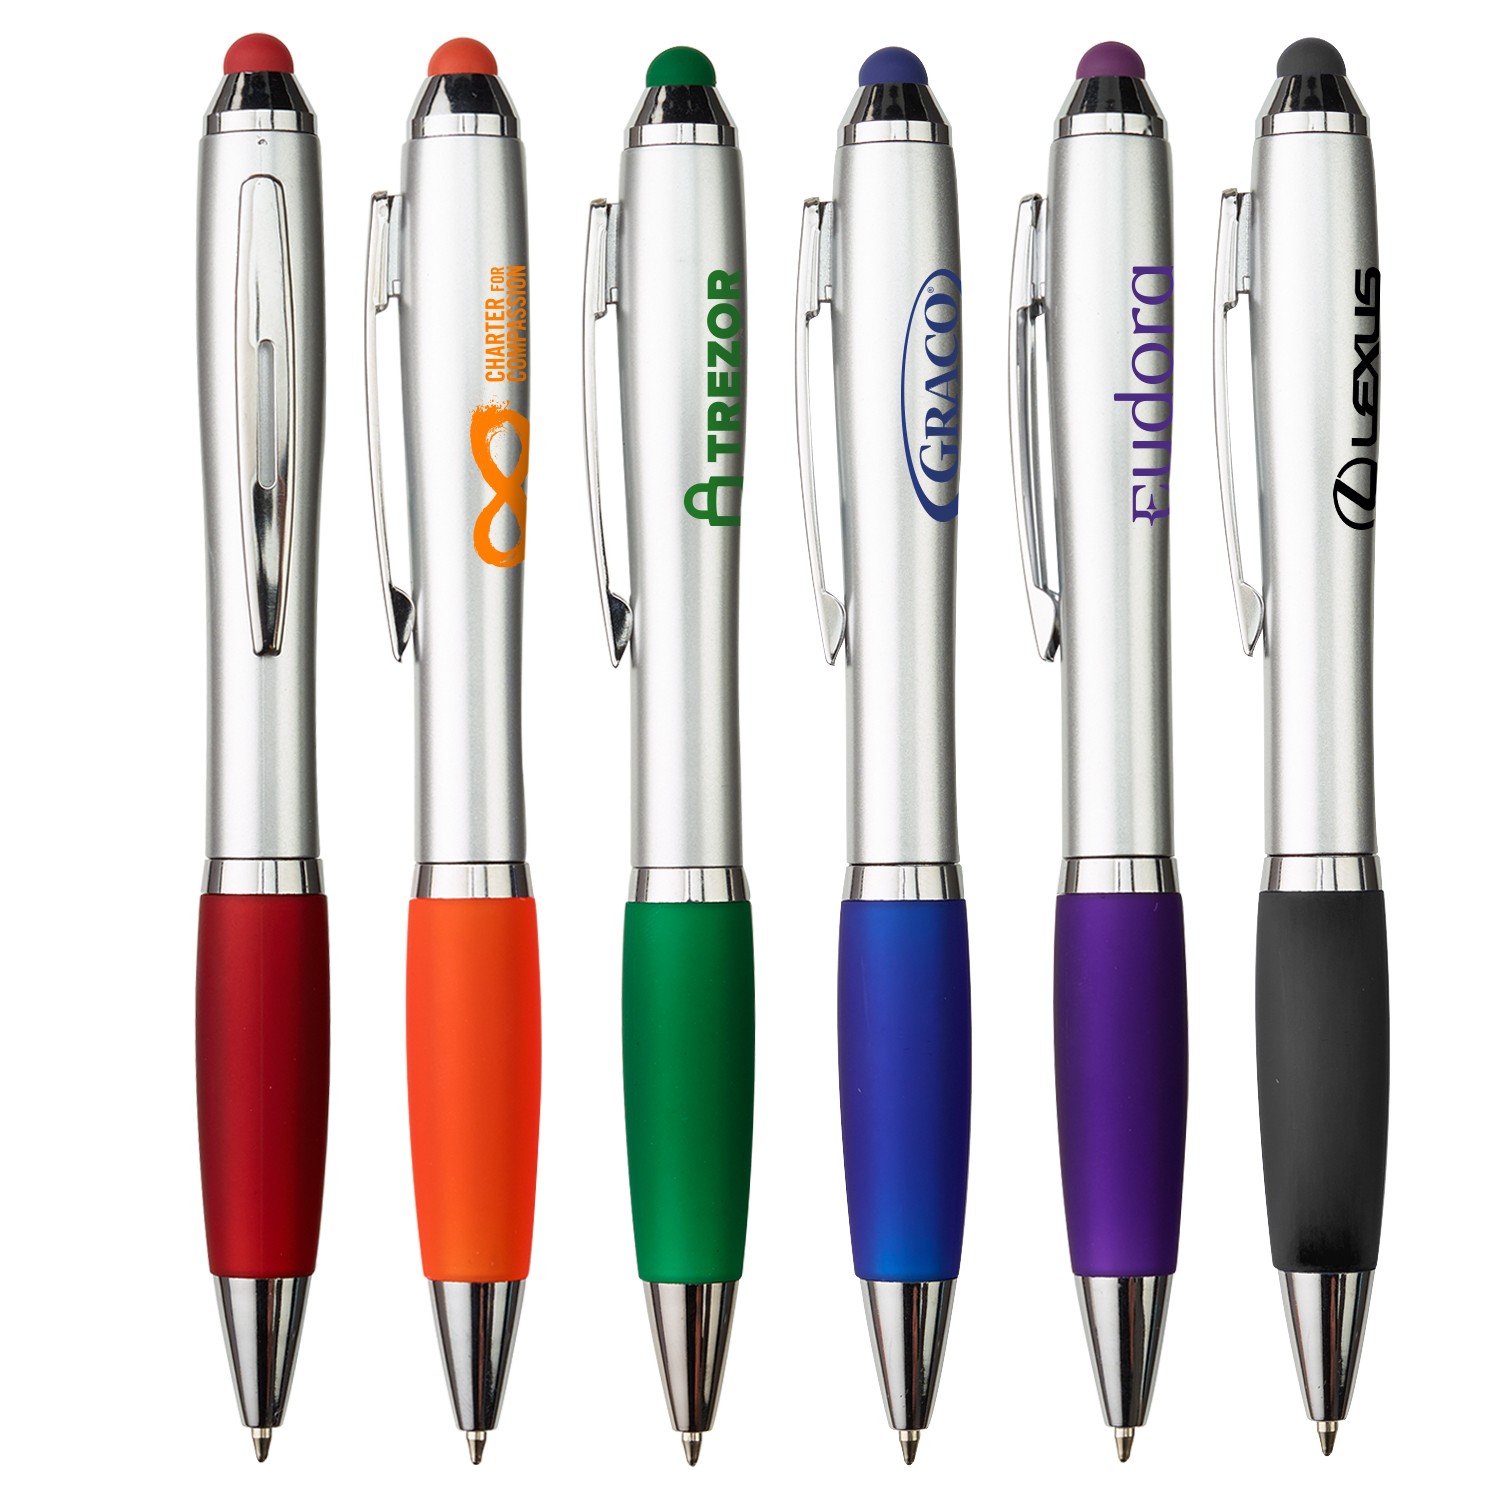 pens made and designed by garuda promotions